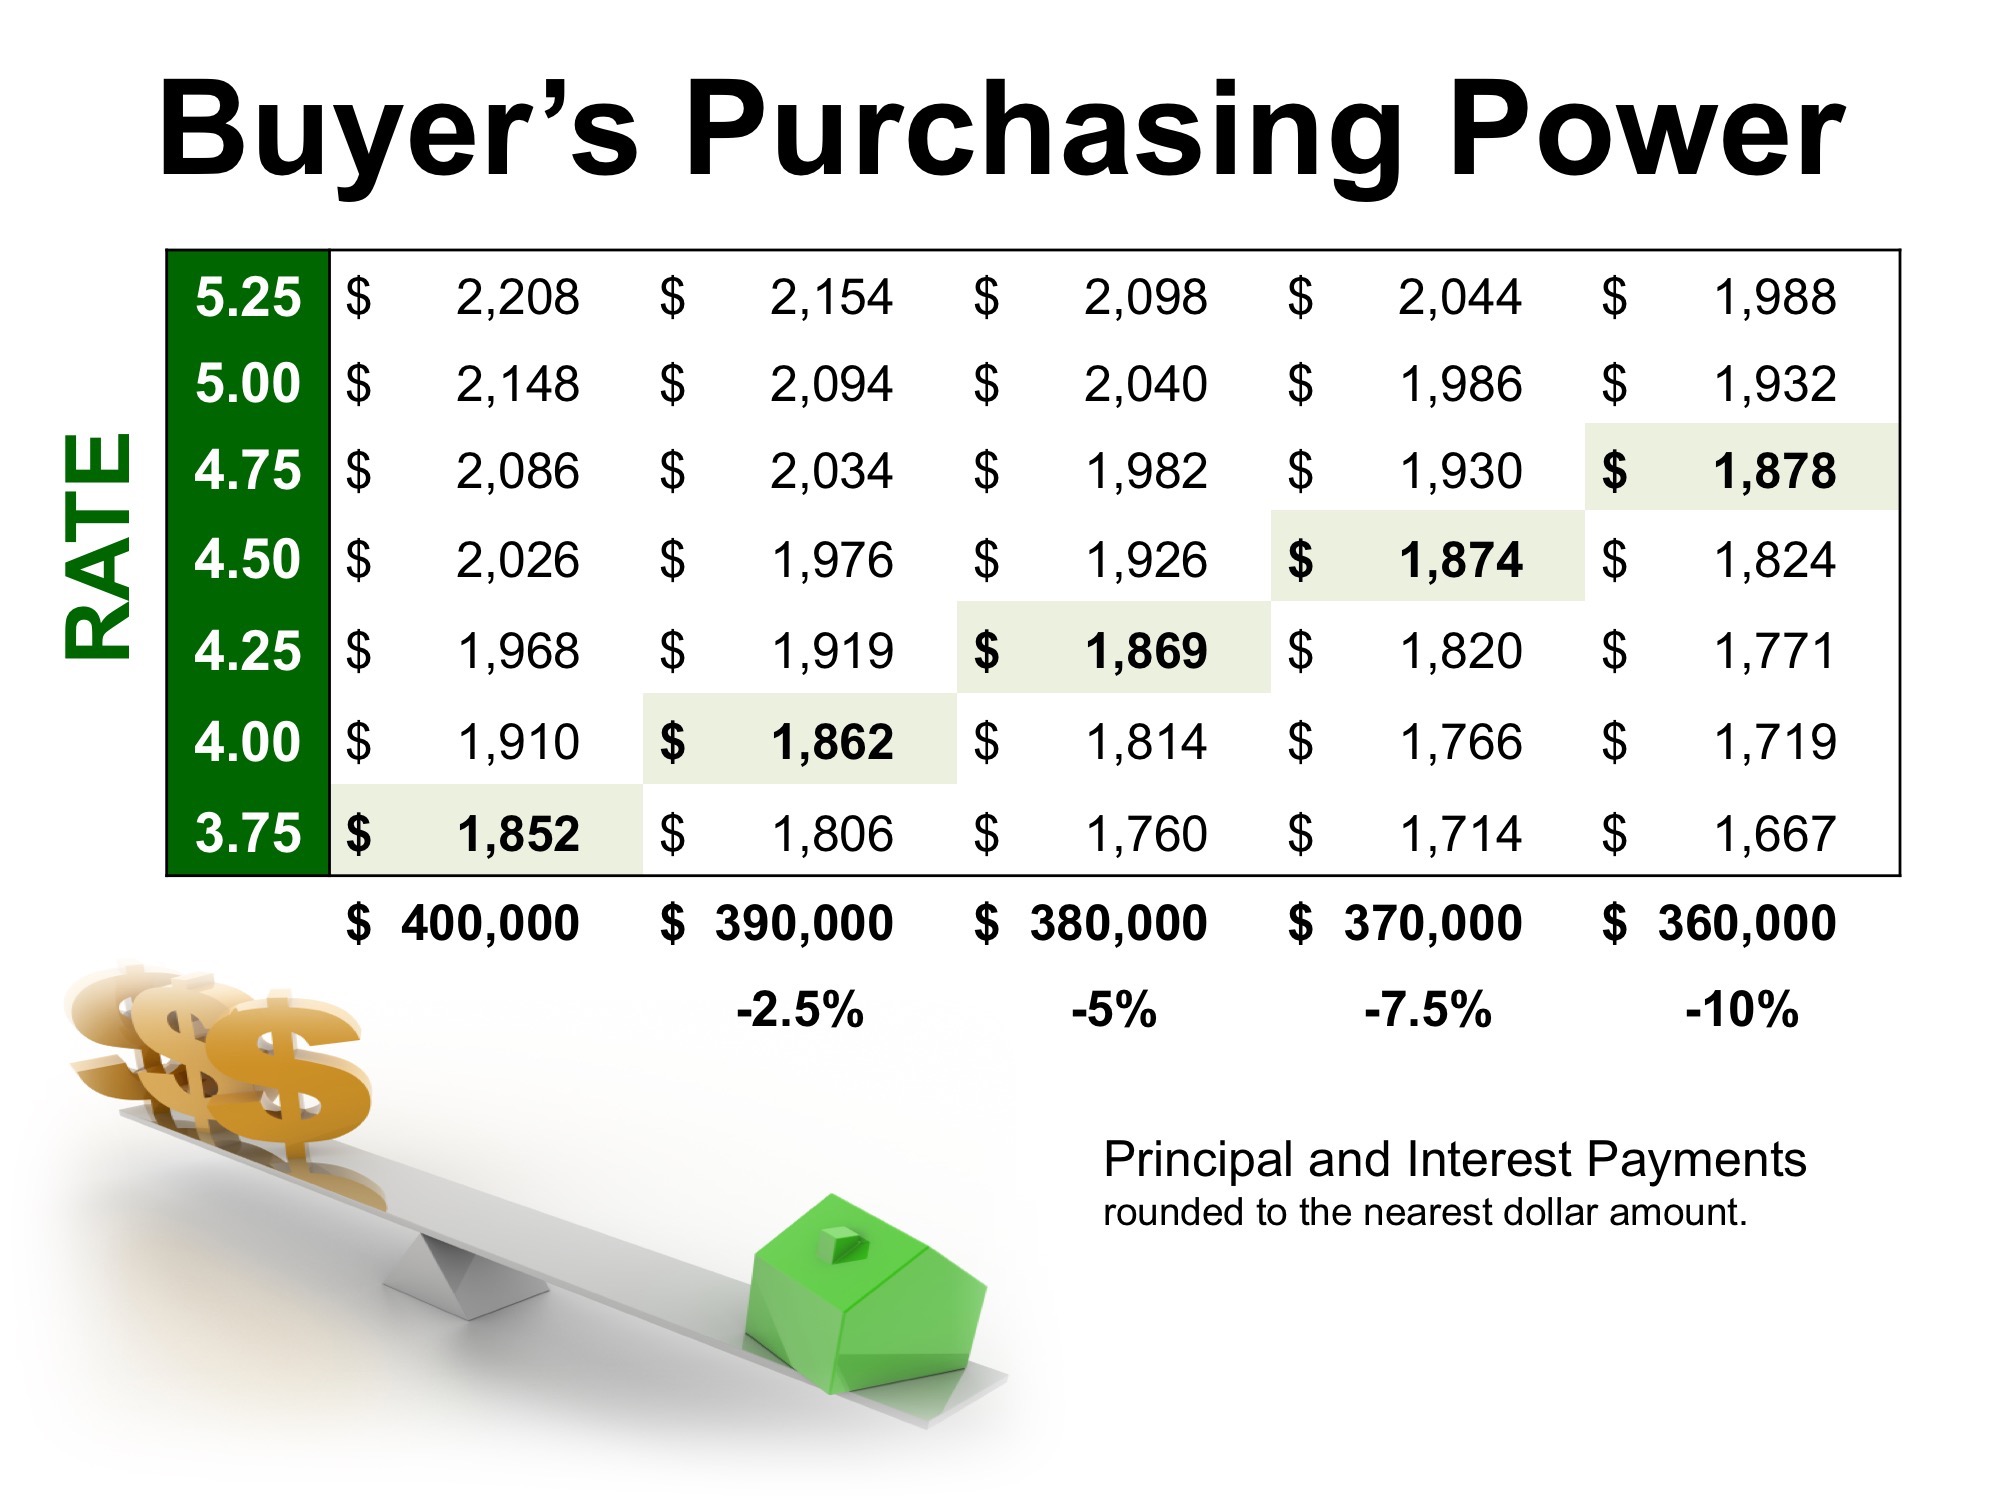 Low Interest Rates Have a High Impact on Your Purchasing Power | Simplifying The Market